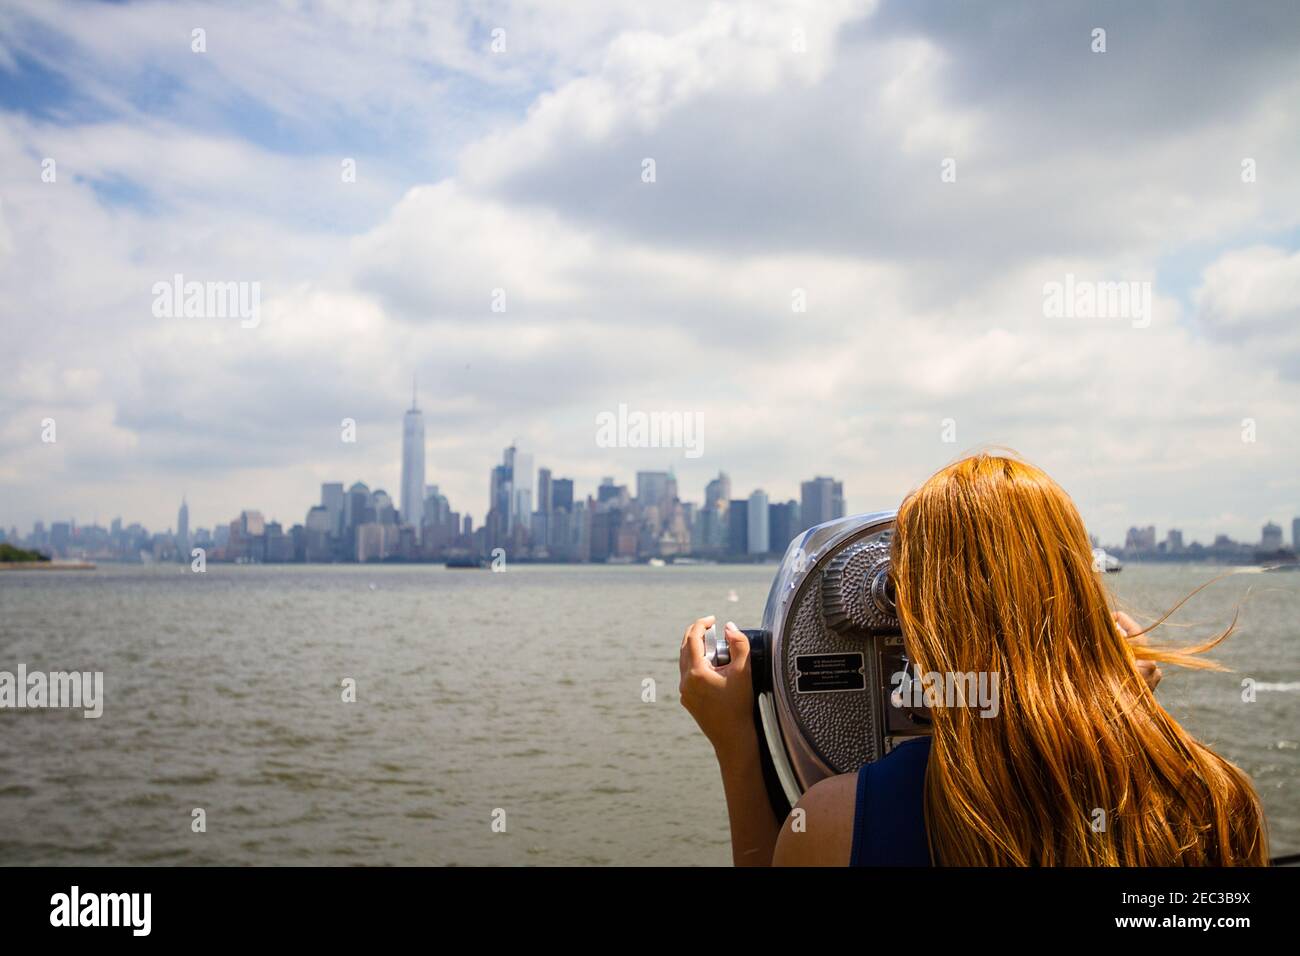 A young woman with red hair is looking at the cityscape of New York City through a binocular on Liberty Island Stock Photo